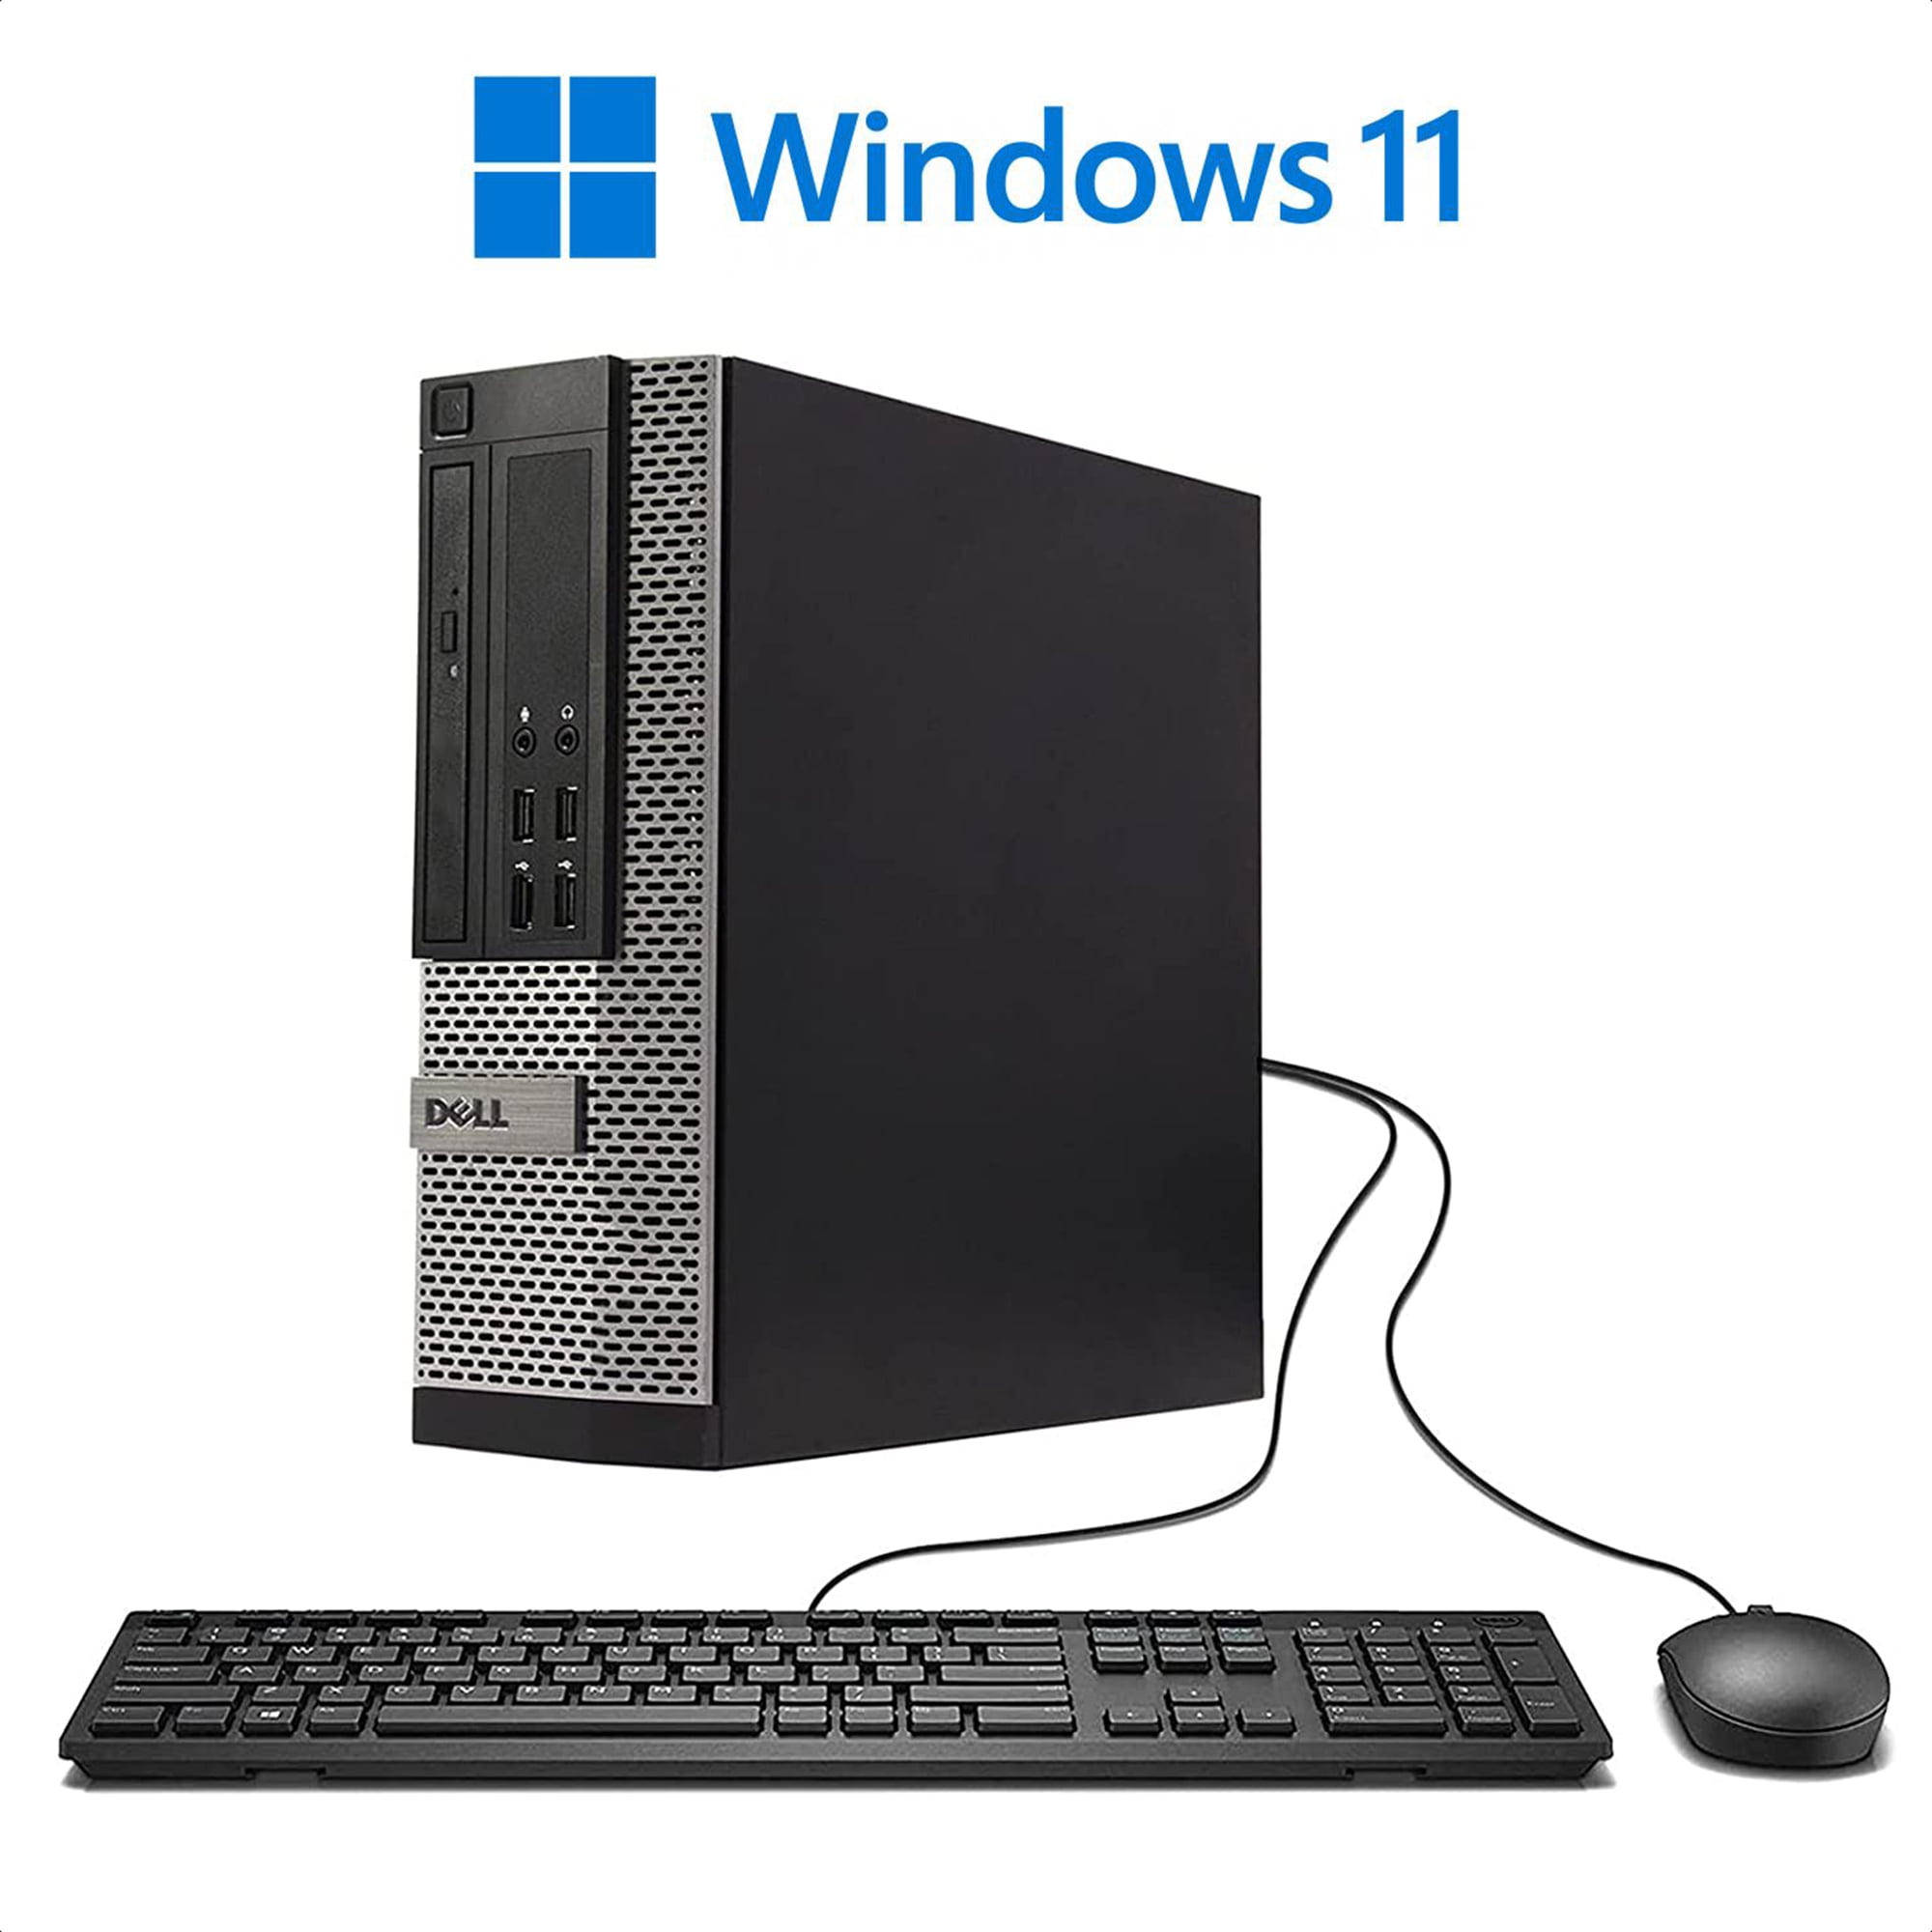 Dell OptiPlex 7010 Windows 11 Pro Desktop Computer Intel Core i5 3.1GHz  Processor 8GB RAM 500GB HD Wifi with a (Monitor Not Included) Keyboard and 